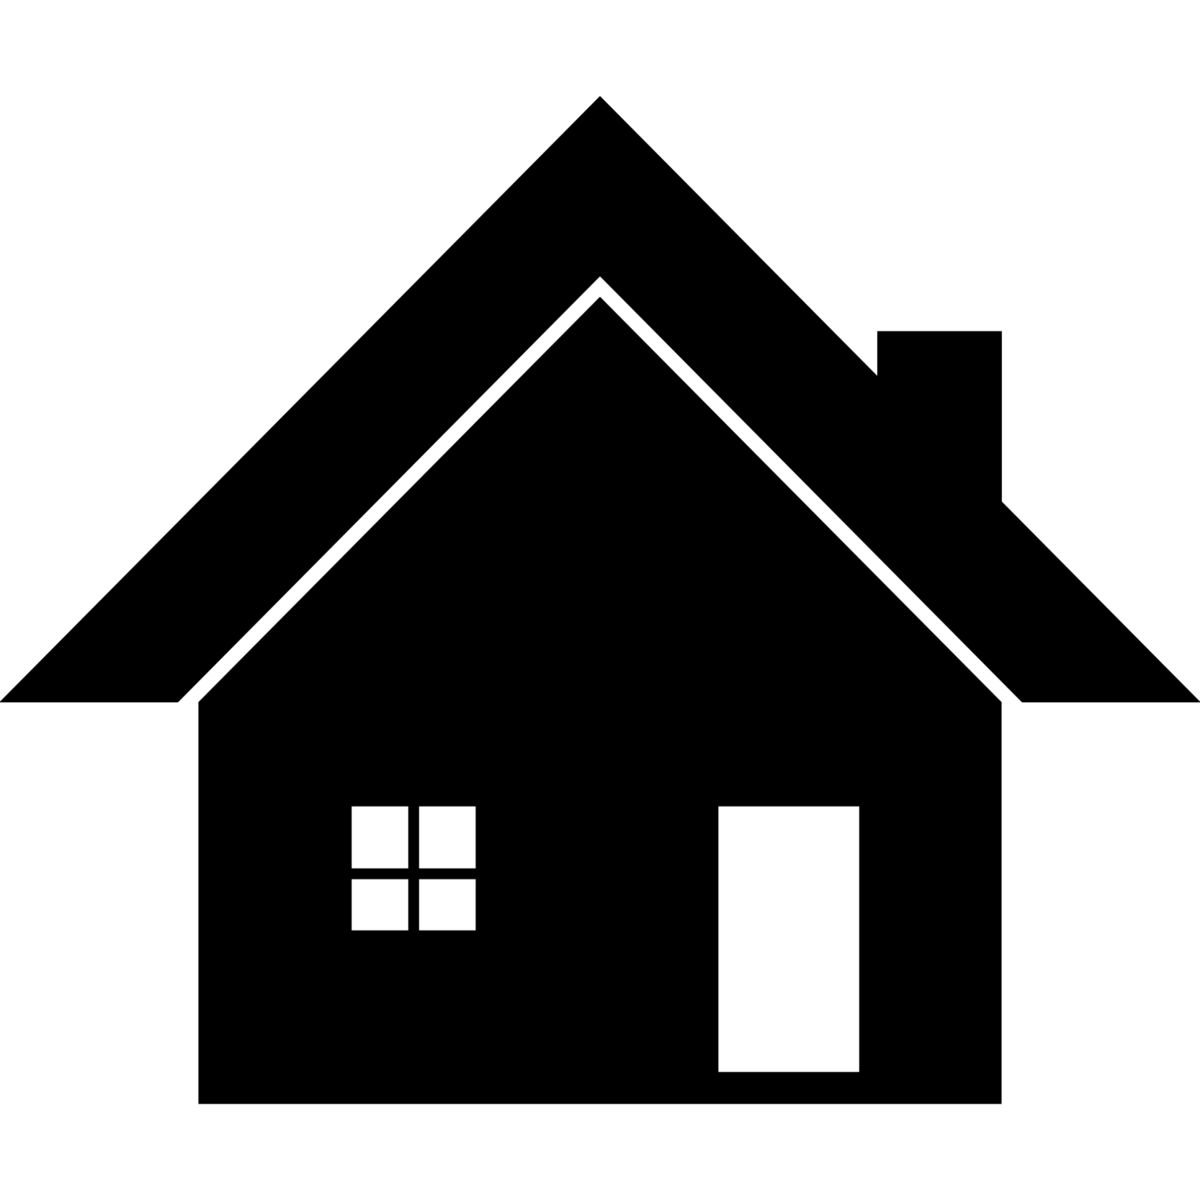 House Transparent Logo - House Transparent Image PNG Icon and PNG Background